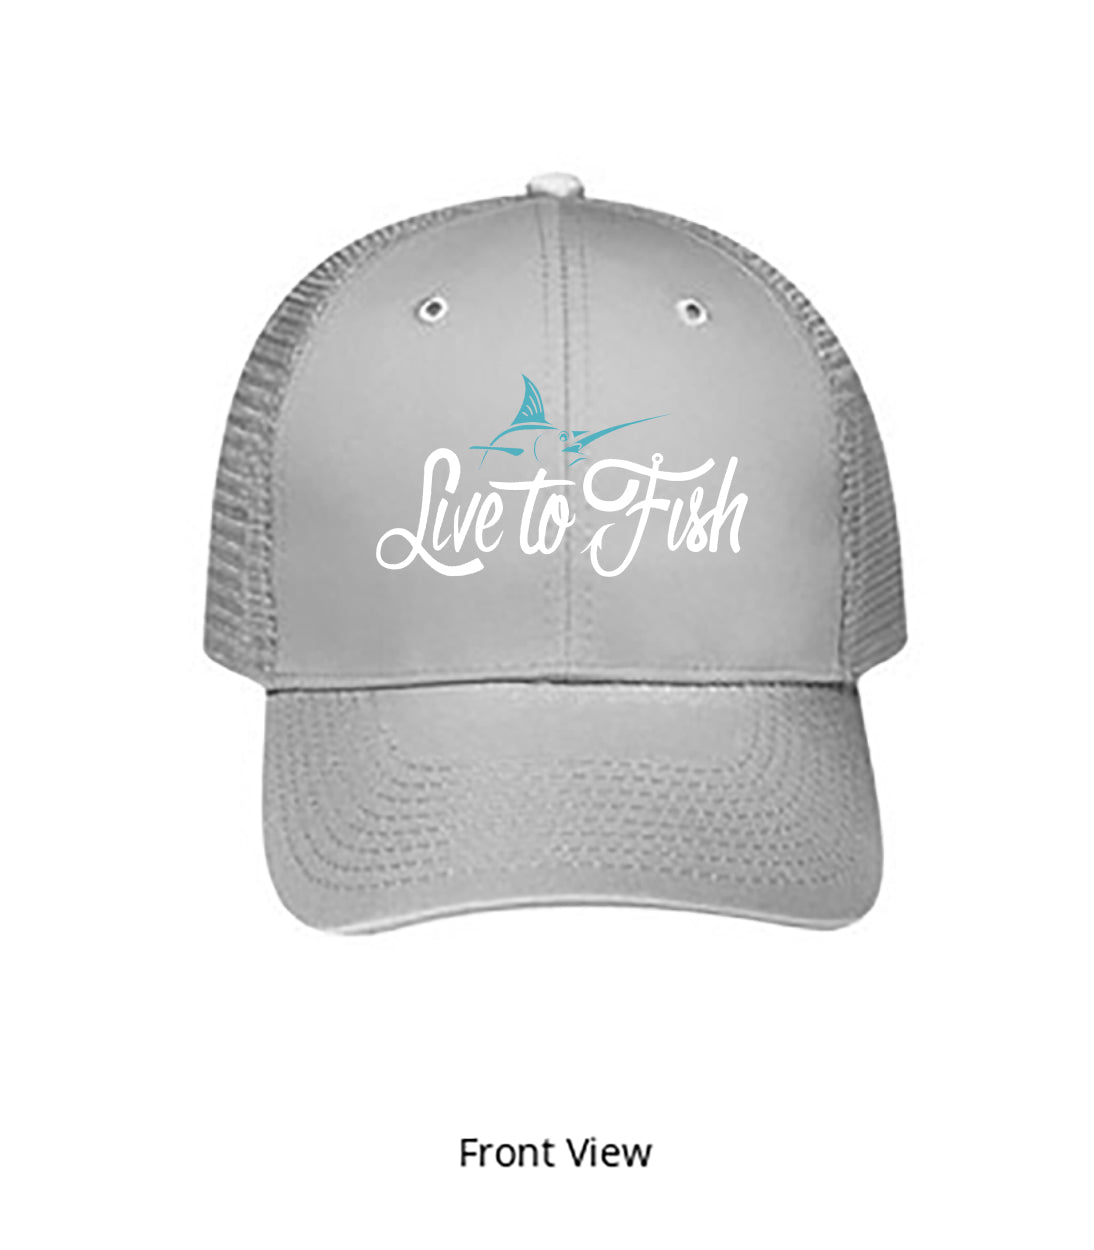 Live to Fish Marlin Embroidered 6 Panel Cotton Twill Pro-Style Snap Back Trucker Hat